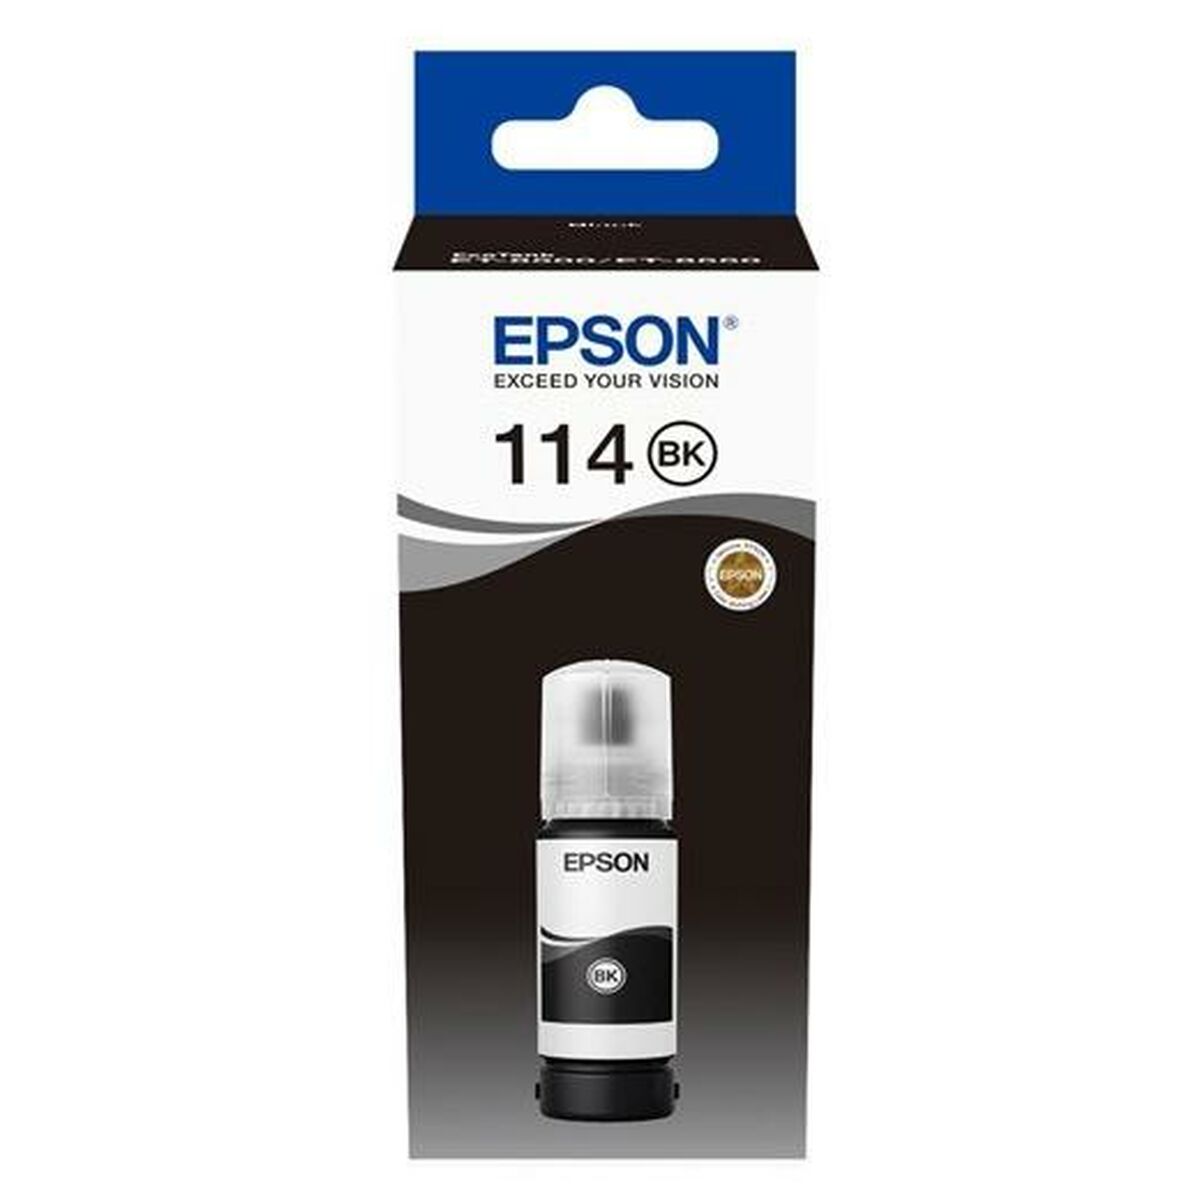 Ink for cartridge refills Epson C13T07A140 Black 70 ml